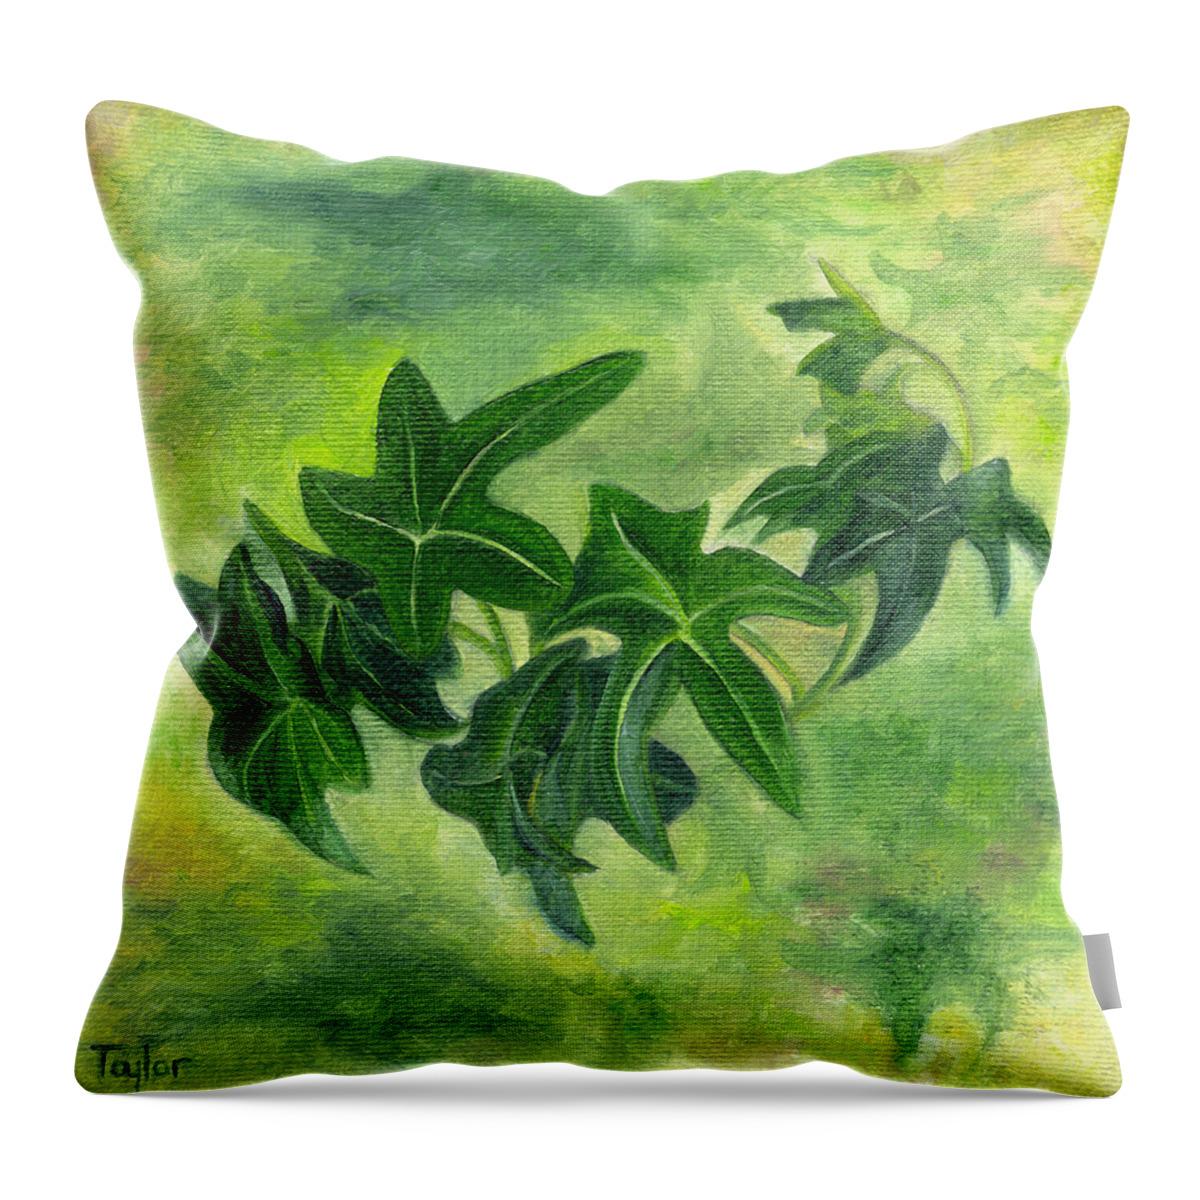 English Ivy Throw Pillow featuring the painting English Ivy by FT McKinstry